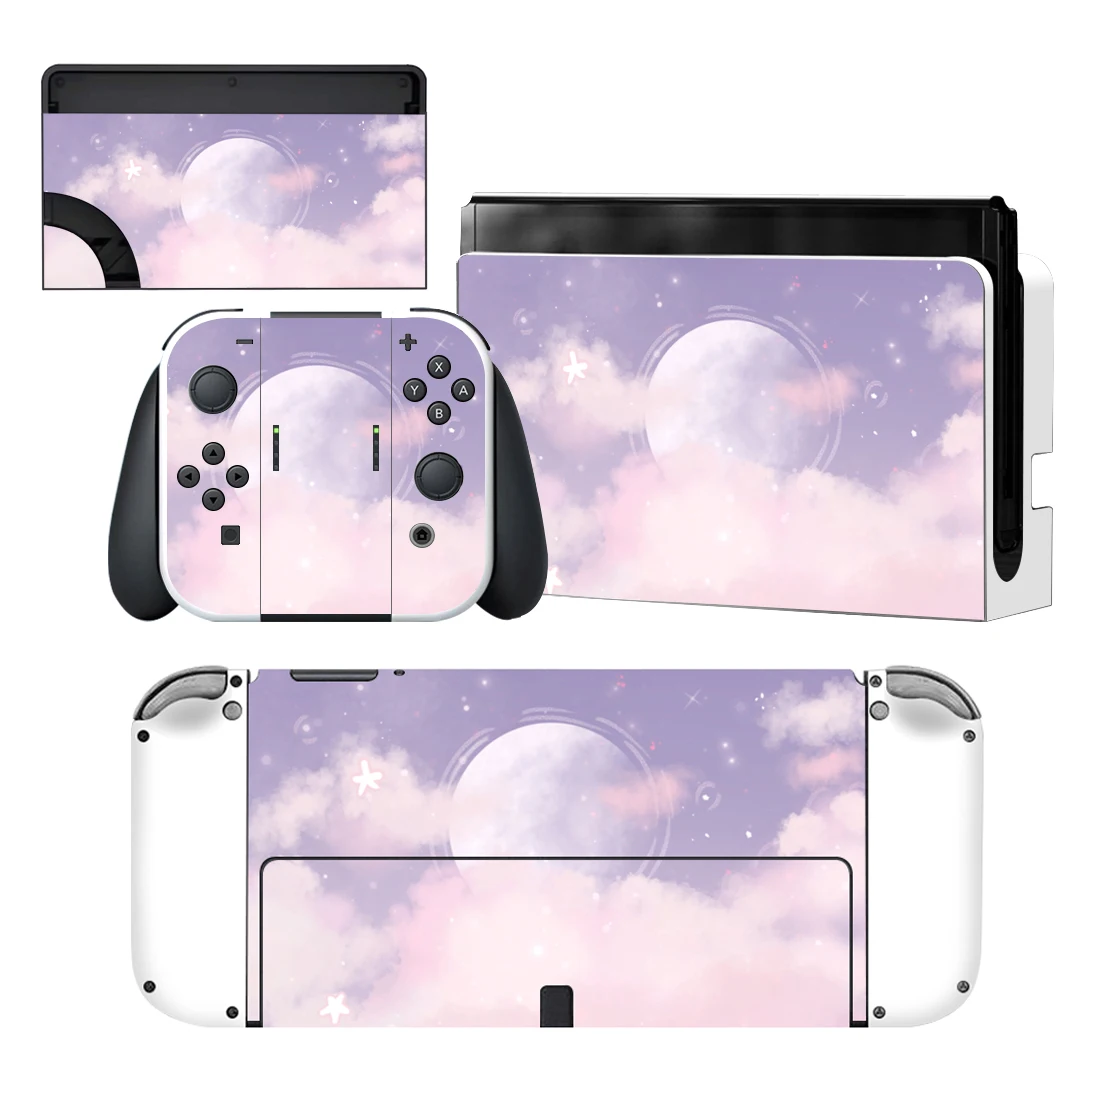 

Starry Sky Star Nintendoswitch Skin Cover Sticker Decal for Nintendo Switch OLED Console Joy-con Controller Dock Vinyl